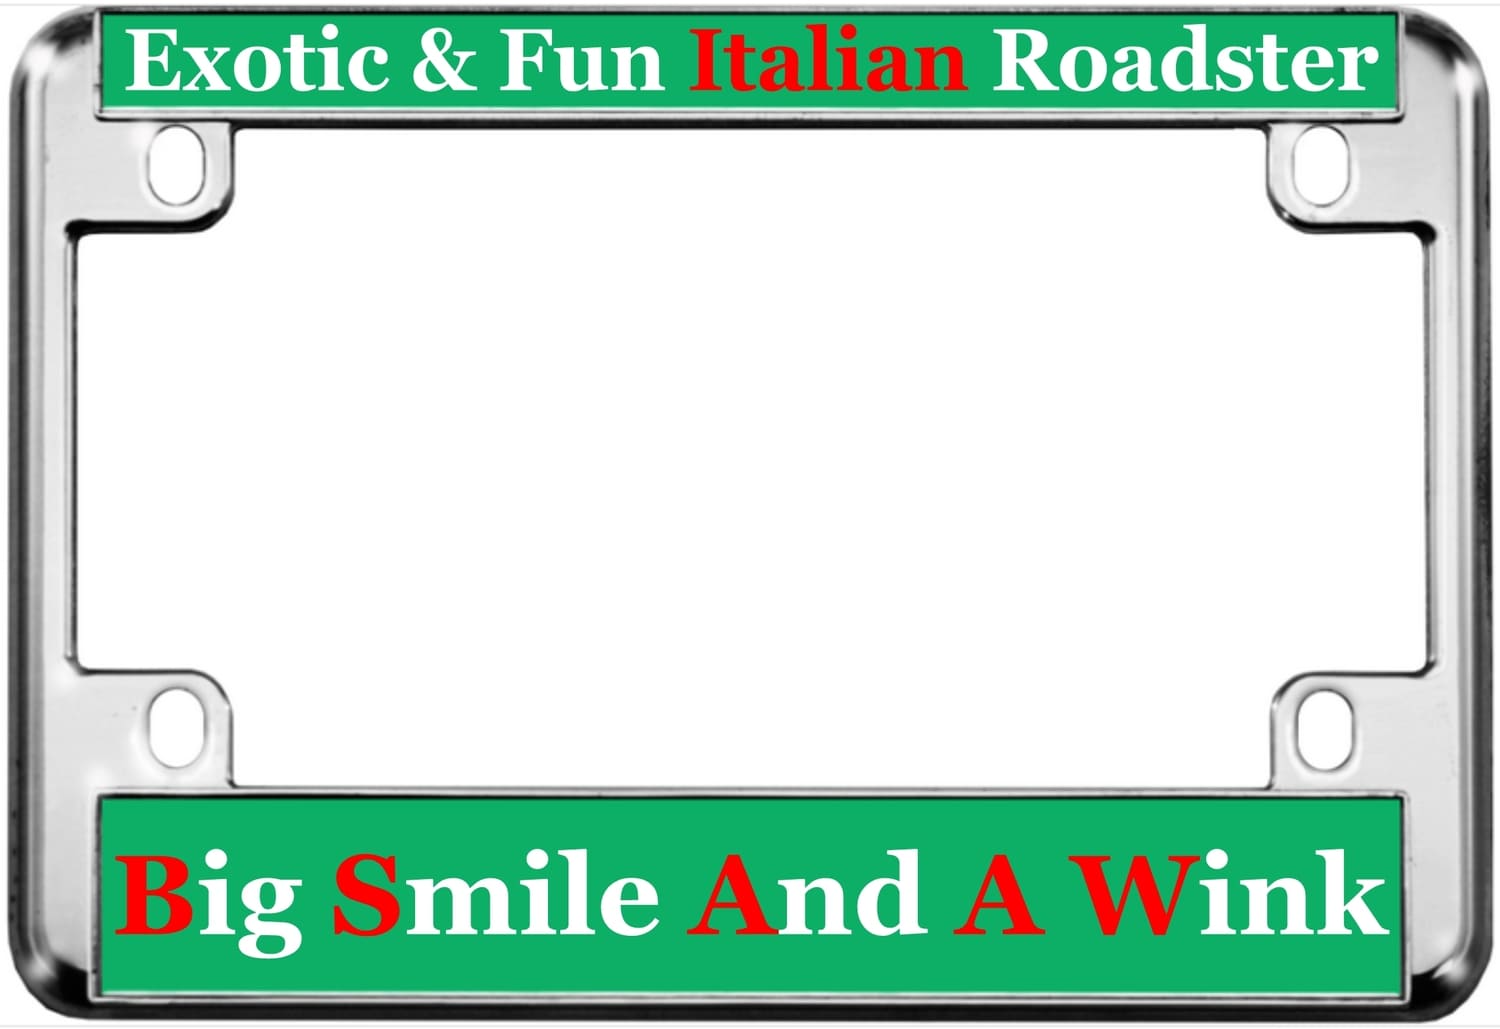 Motorcycle Metal License Plate Frame with Exotic & Fun Italian Roadster Design - Chrome